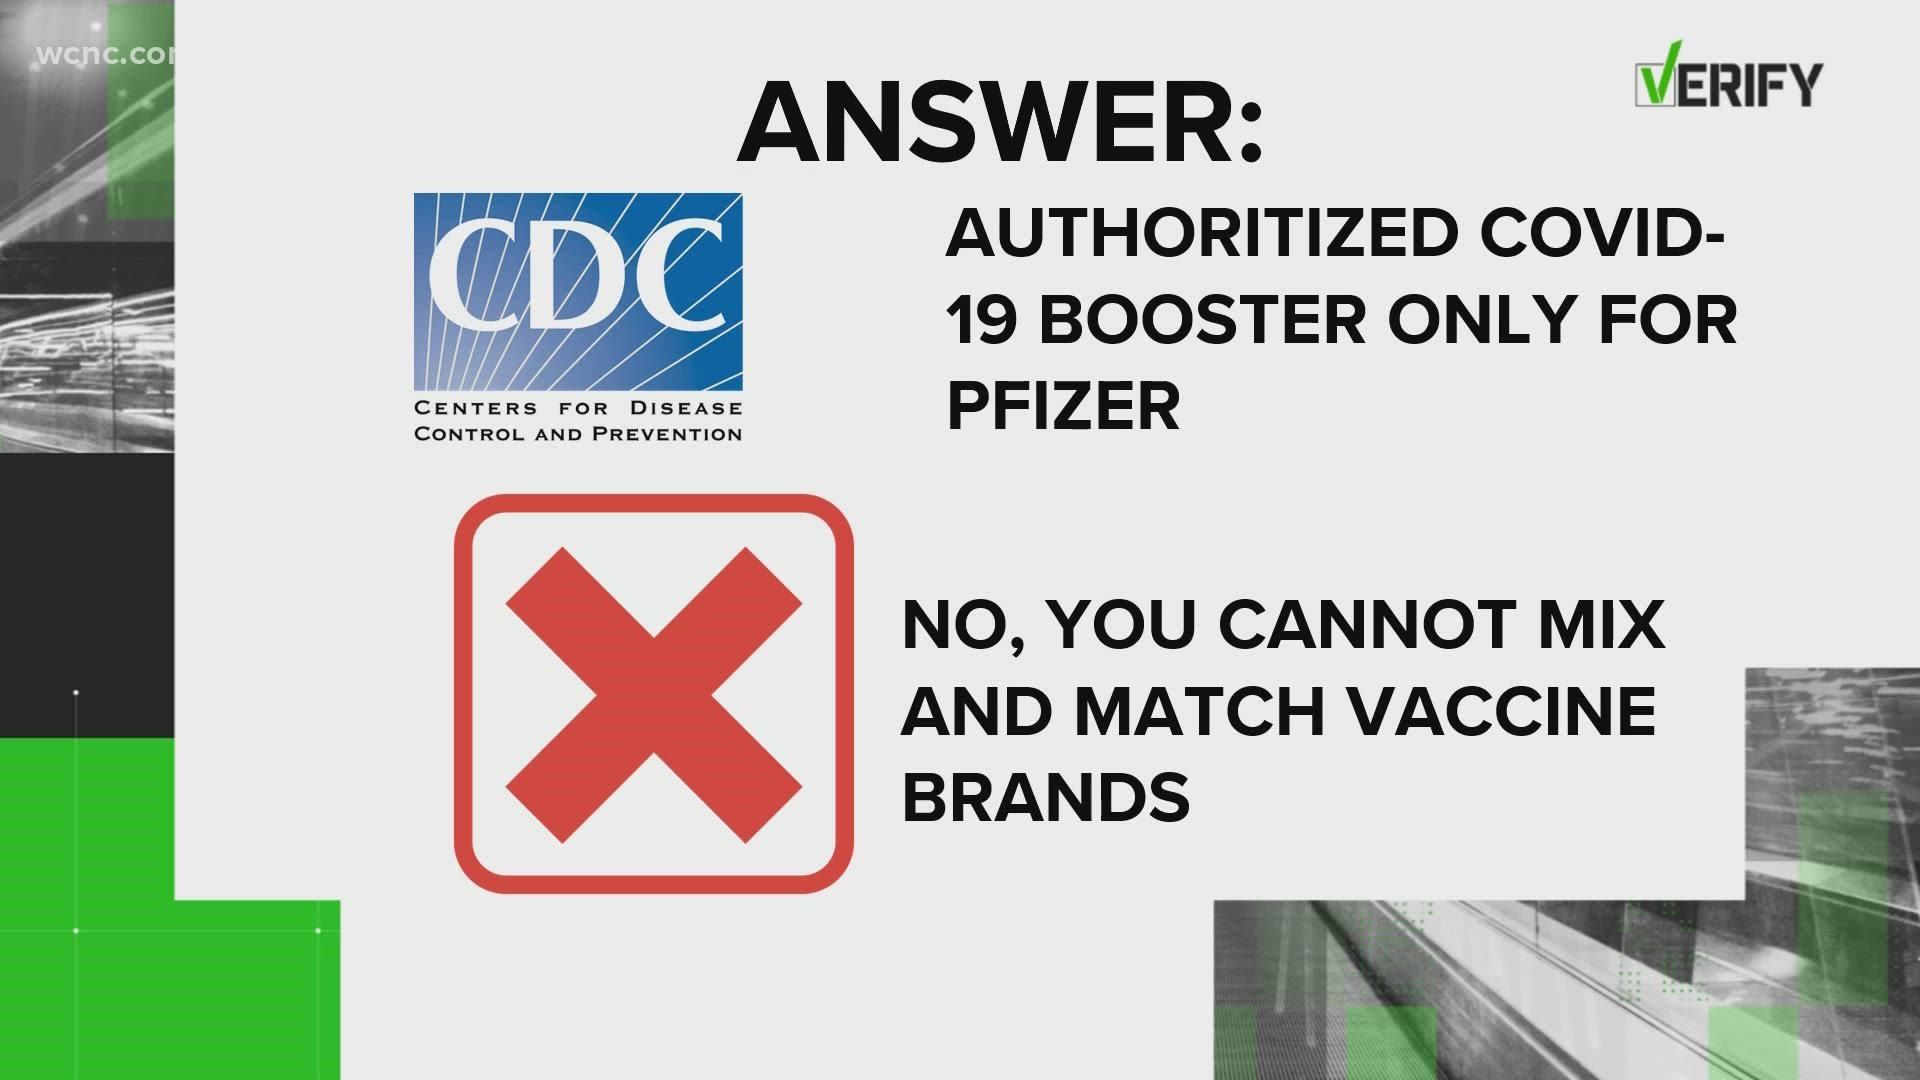 First, a look at our sources: the CDC, the FDA, and the North Carolina Department of Health and Human Services.